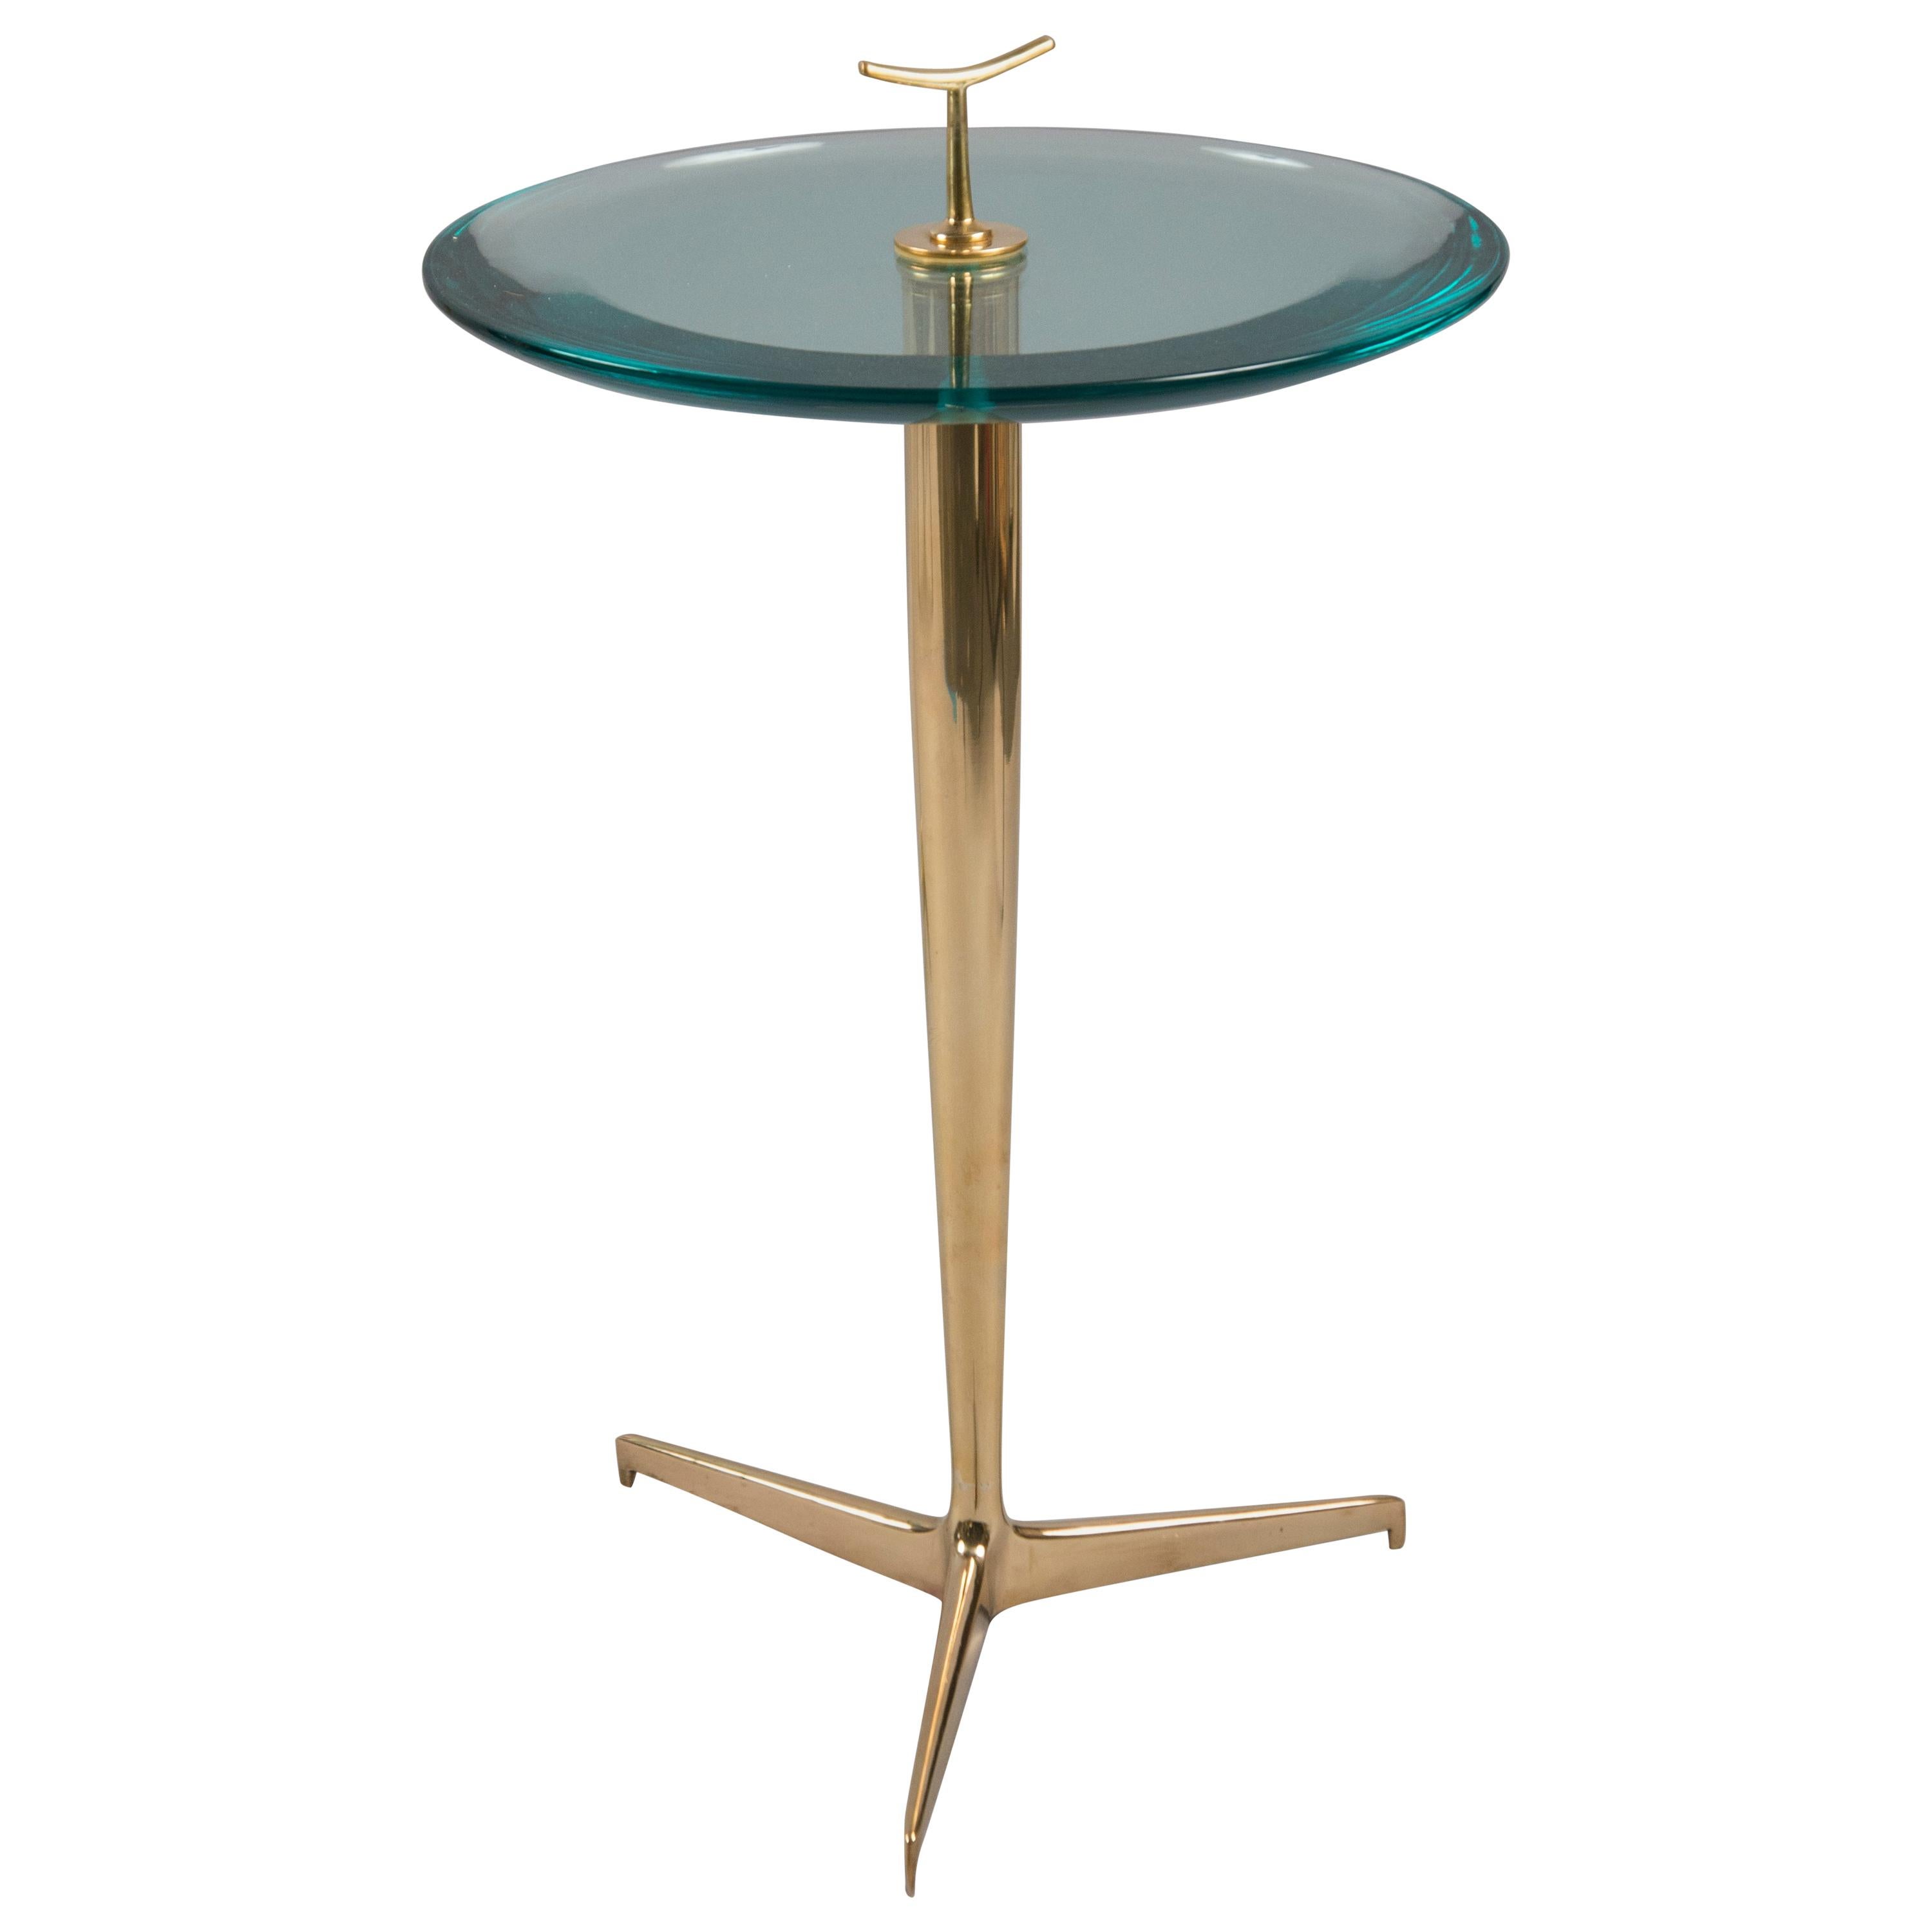 Pair of Brass and Glass Side Tables, Italy, 2018